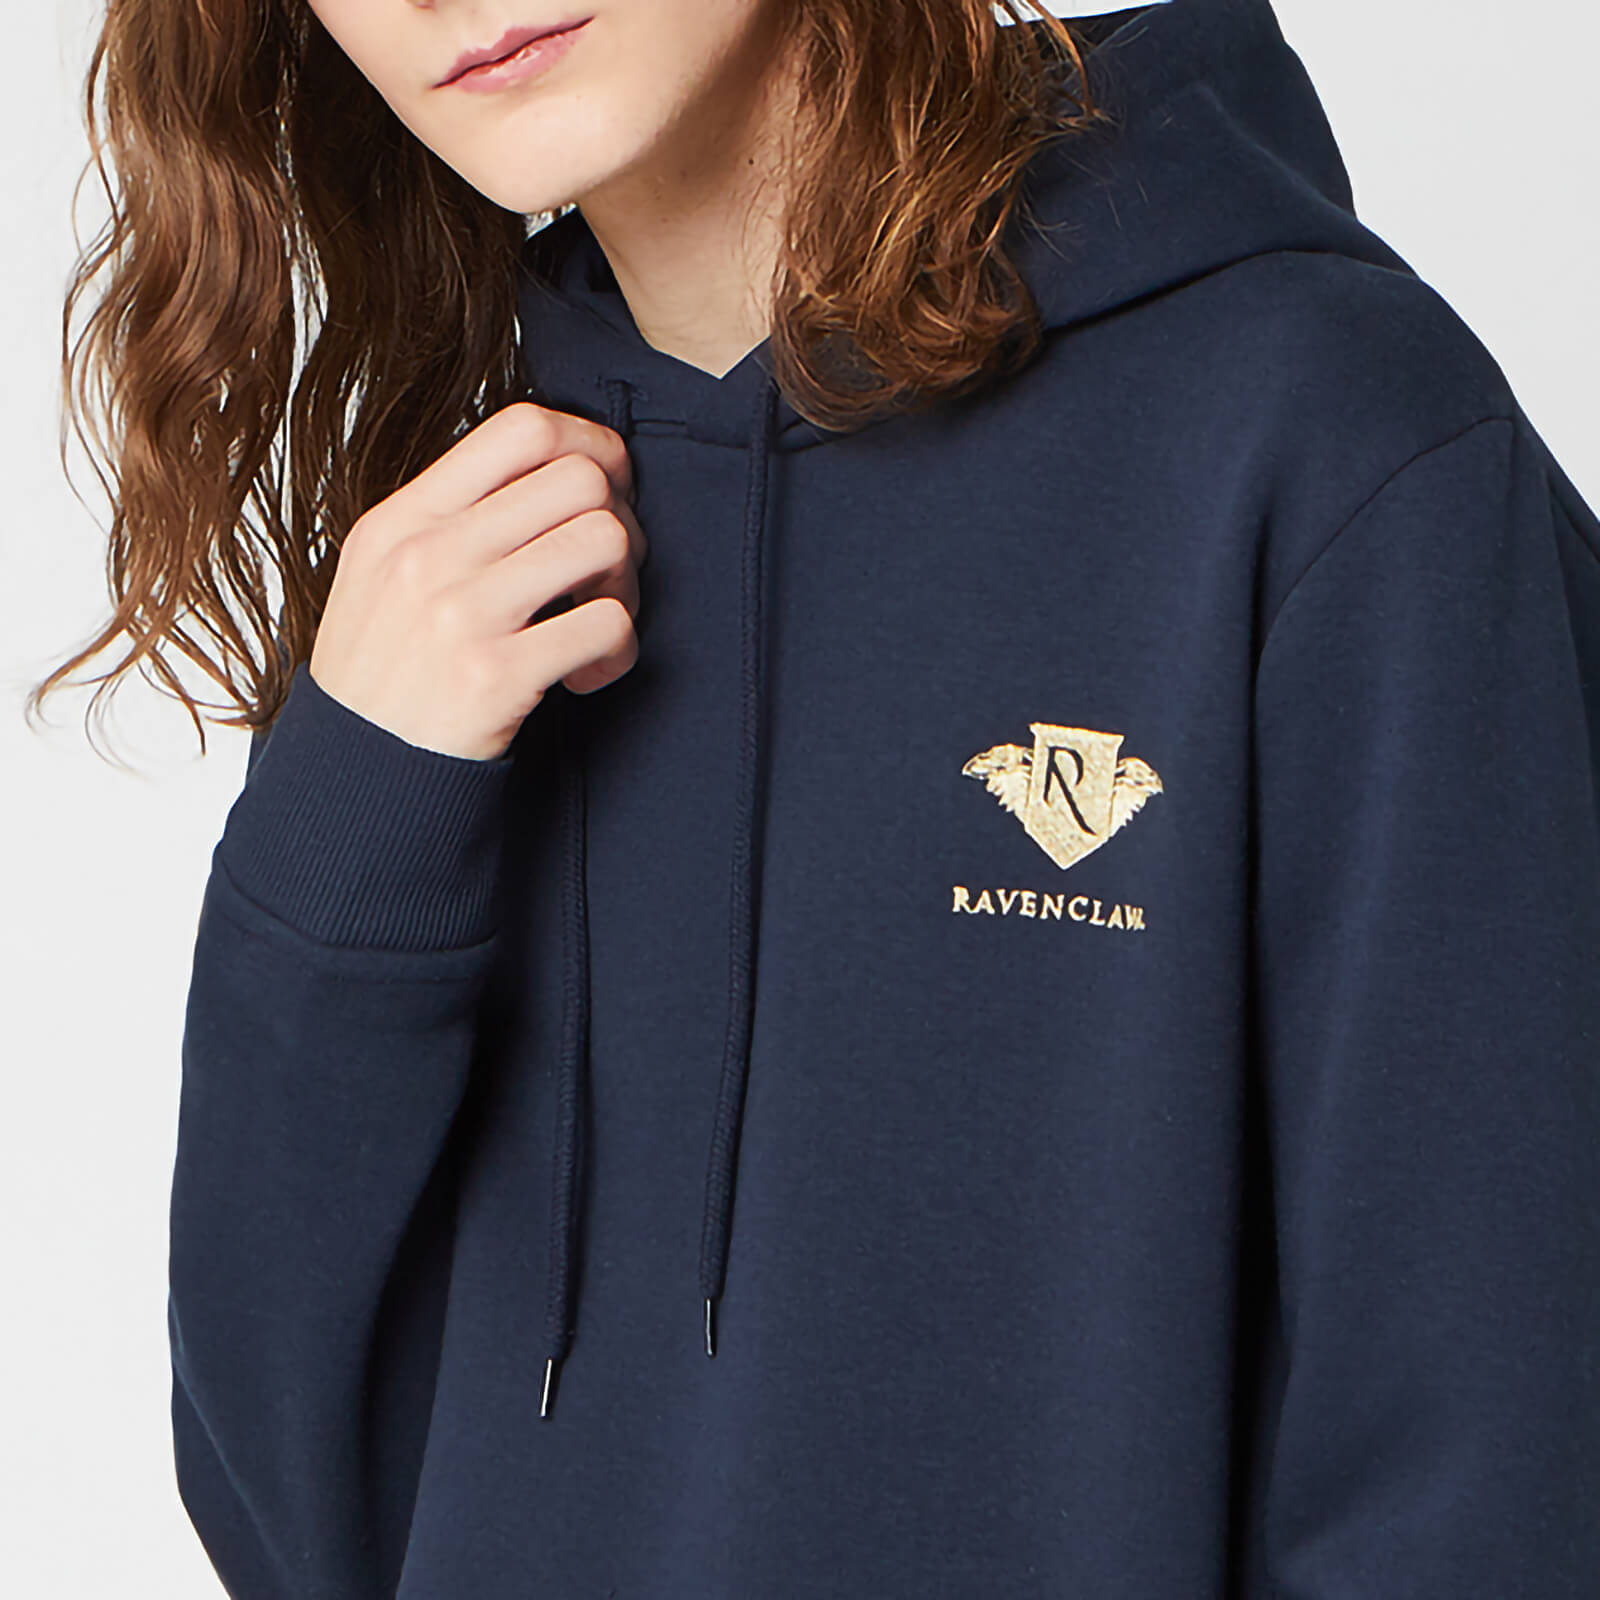 Harry Potter Ravenclaw Unisex Embroidered Hoodie - Navy - XXL